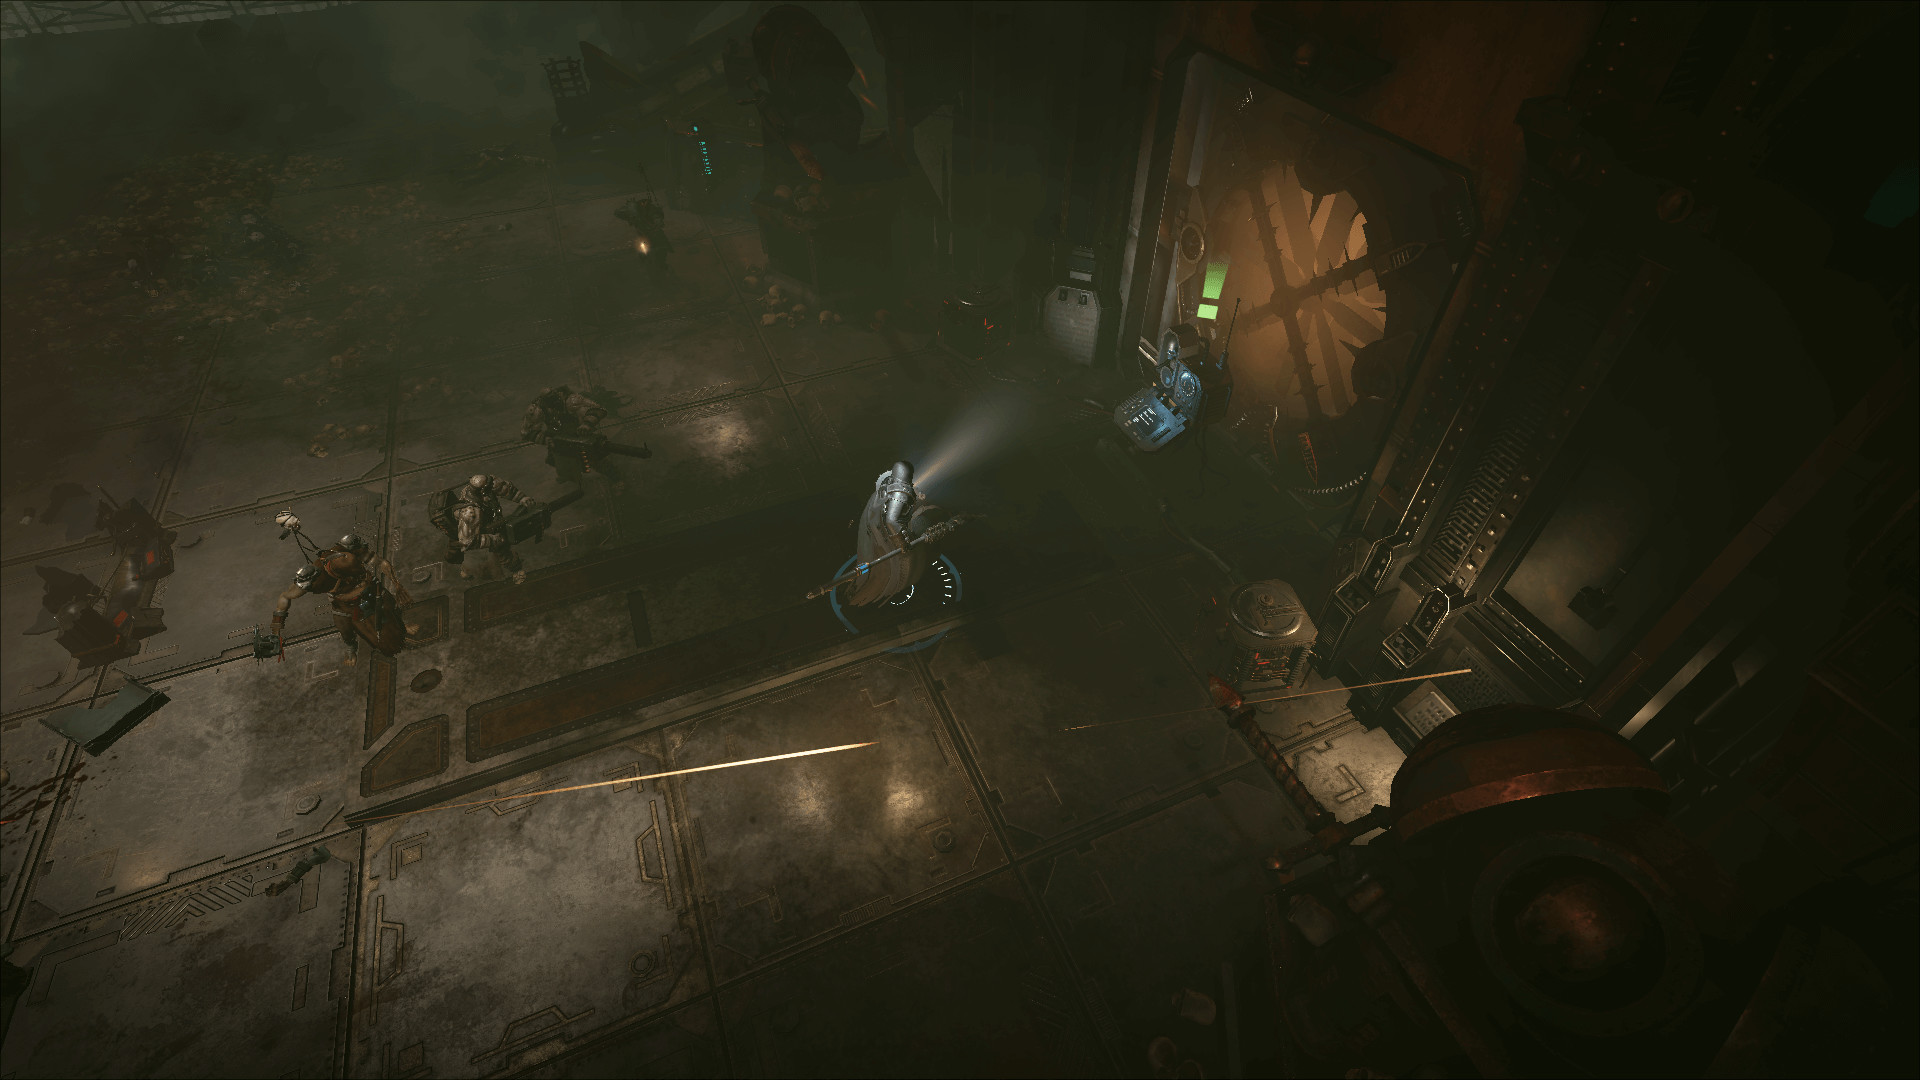 An inquisitor approaches a console in a dark room, from warhammer game Inquisitor - Martyr